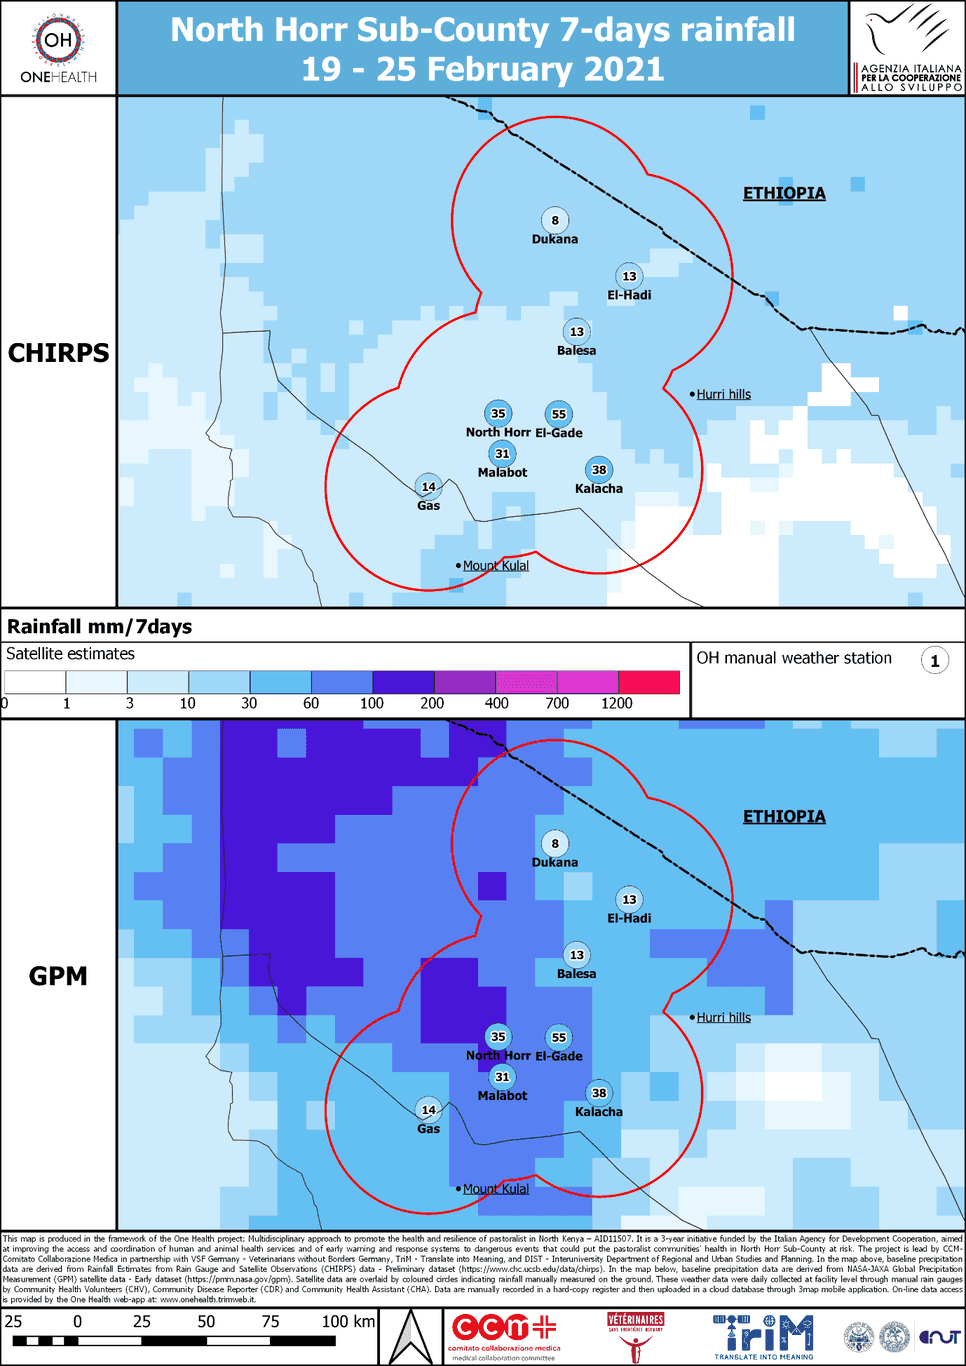 Comparison of ground-based rainfall measurements with GPM and CHIRPS datasets